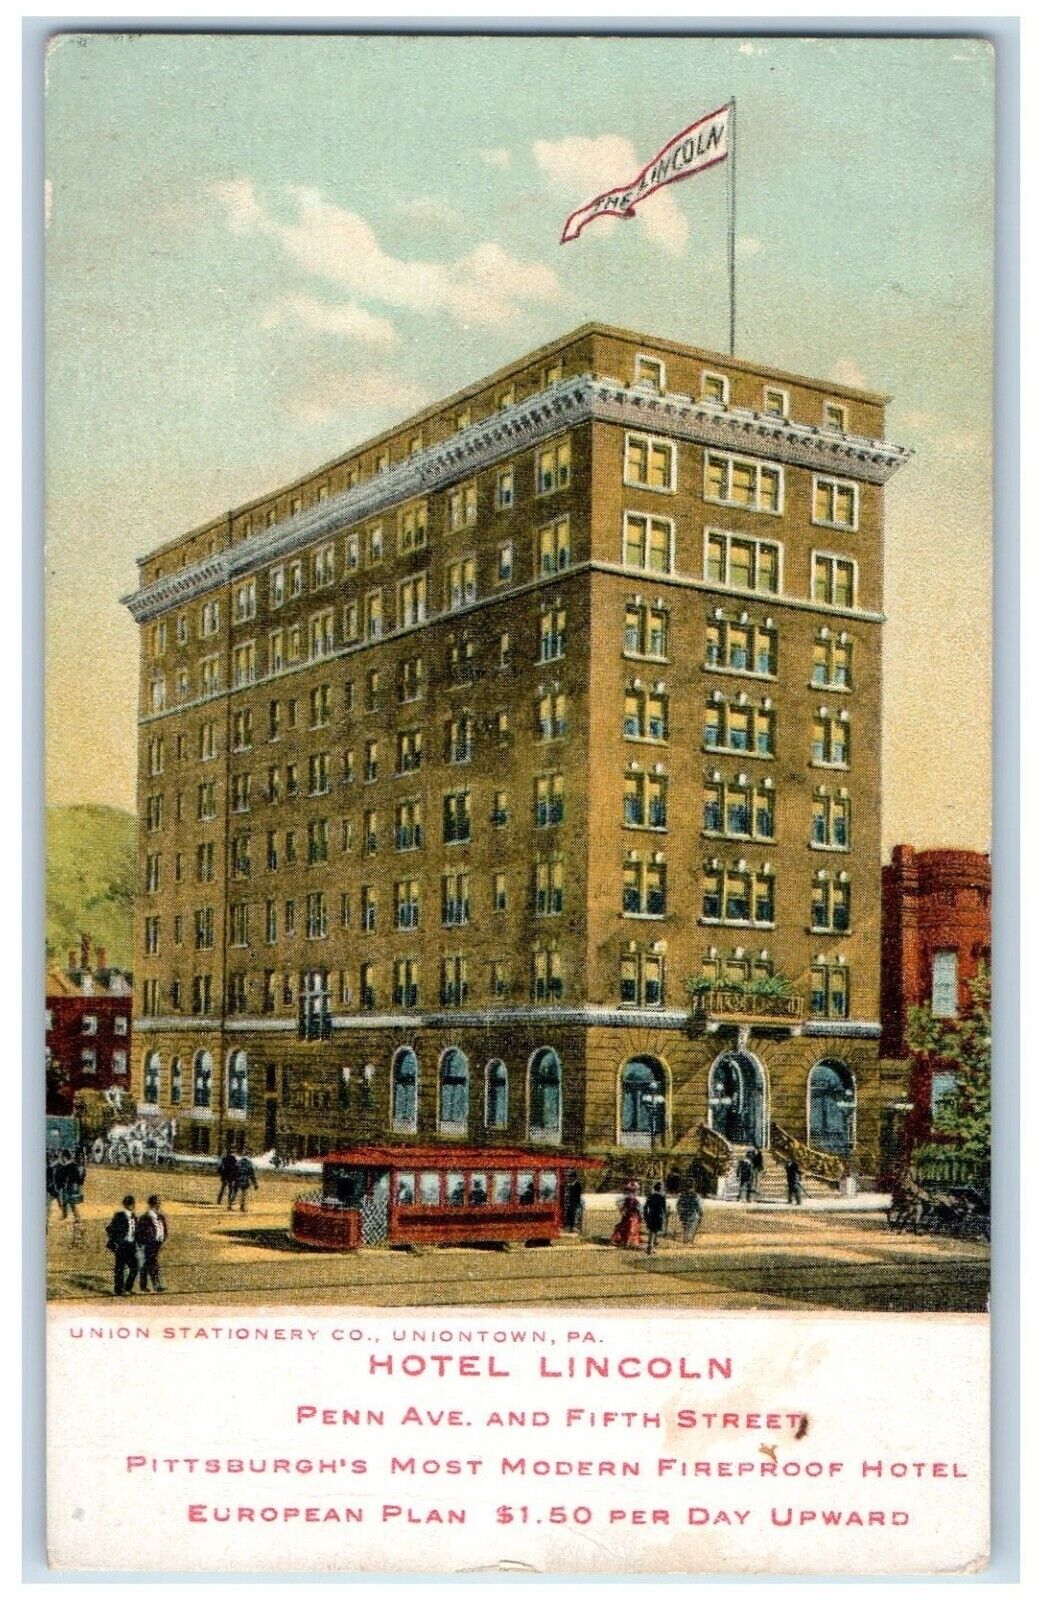 c1910 Hotel Lincoln, Penn Avenue and Fifth Street Pittsburg PA Postcard